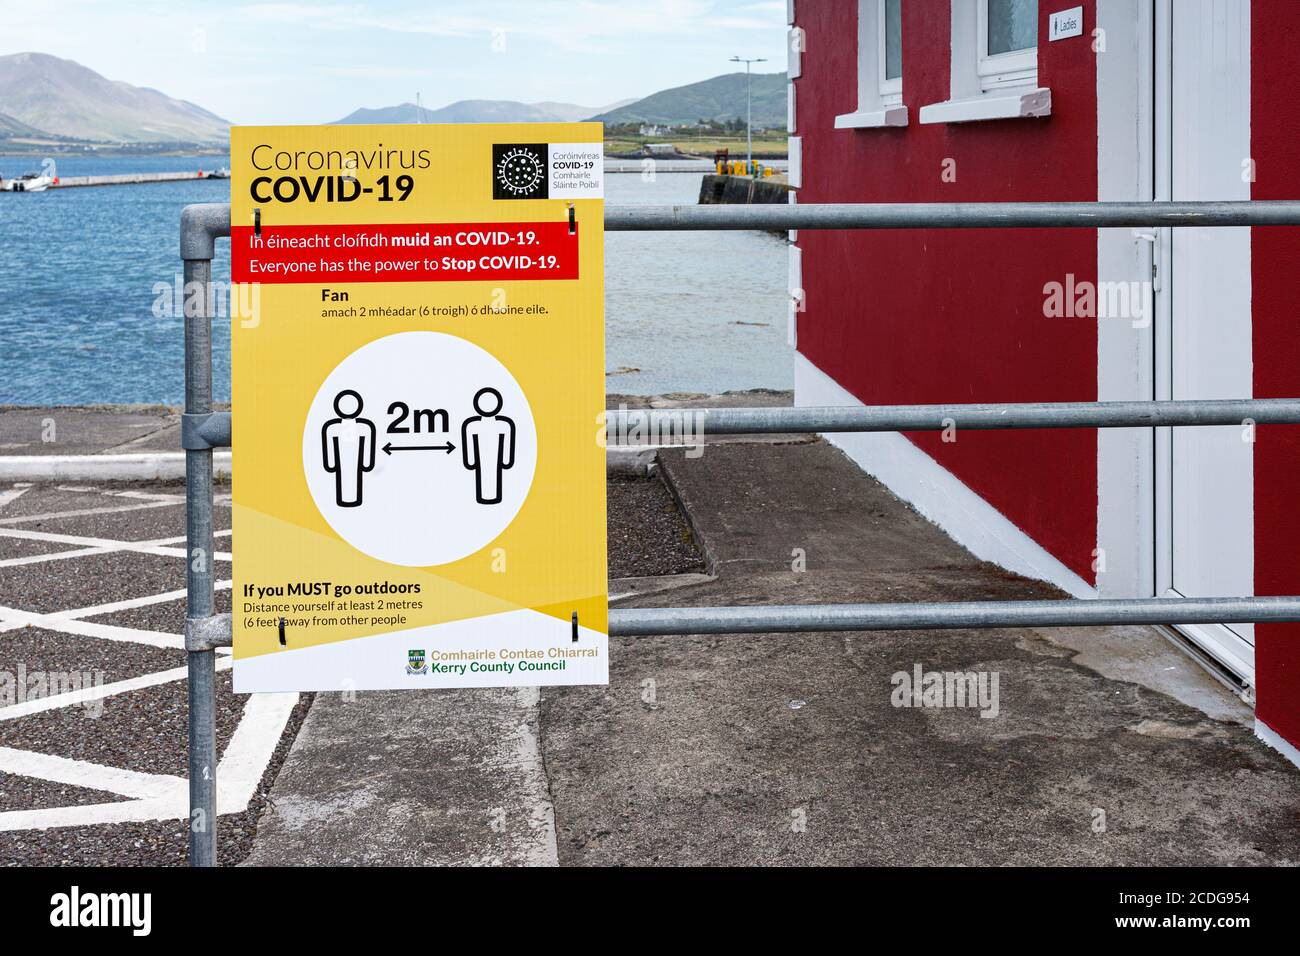 Covid-19 social distancing sign in English and Irish language, County Kerry, Ireland Stock Photo